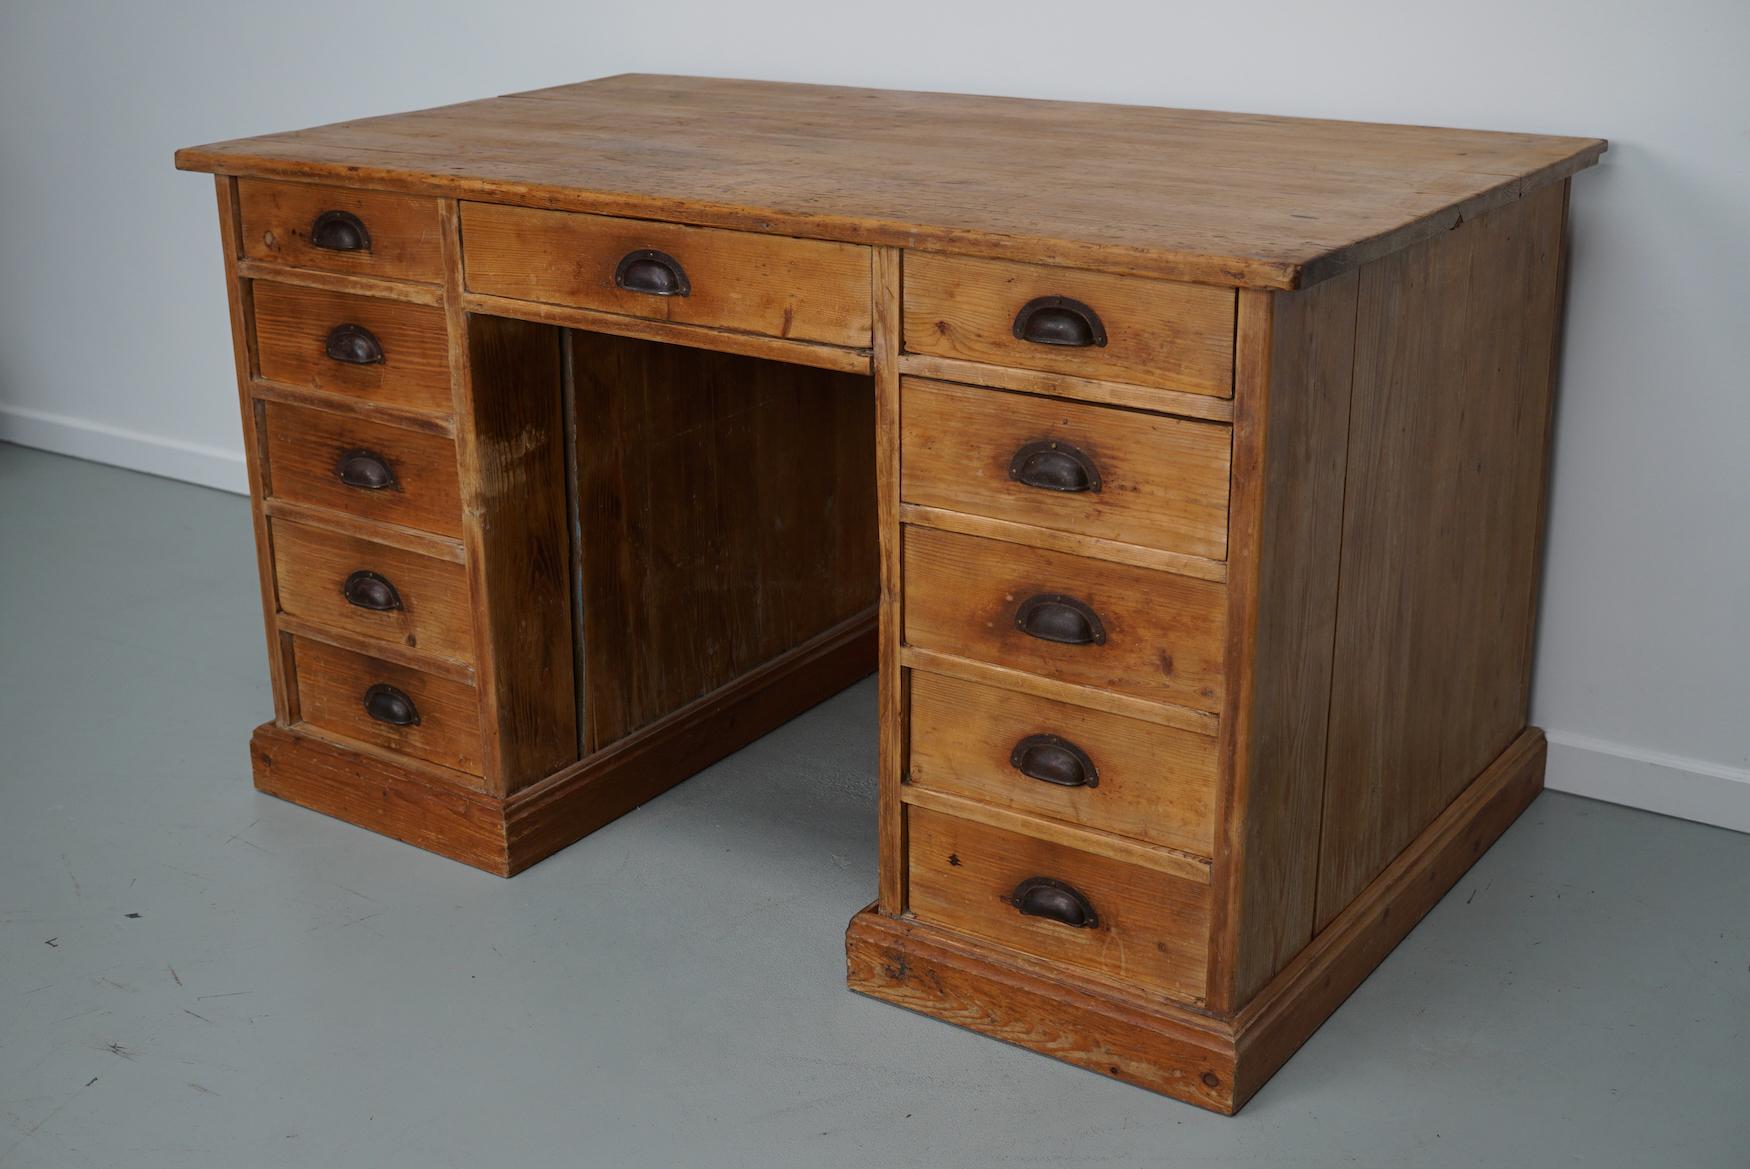 This desk was made around the 1930s in Germany. It is made from solid pine with many very deep drawers. The desk retained a very nice patina and signs of use over the years. The height to the worktop is 79.5 cm.